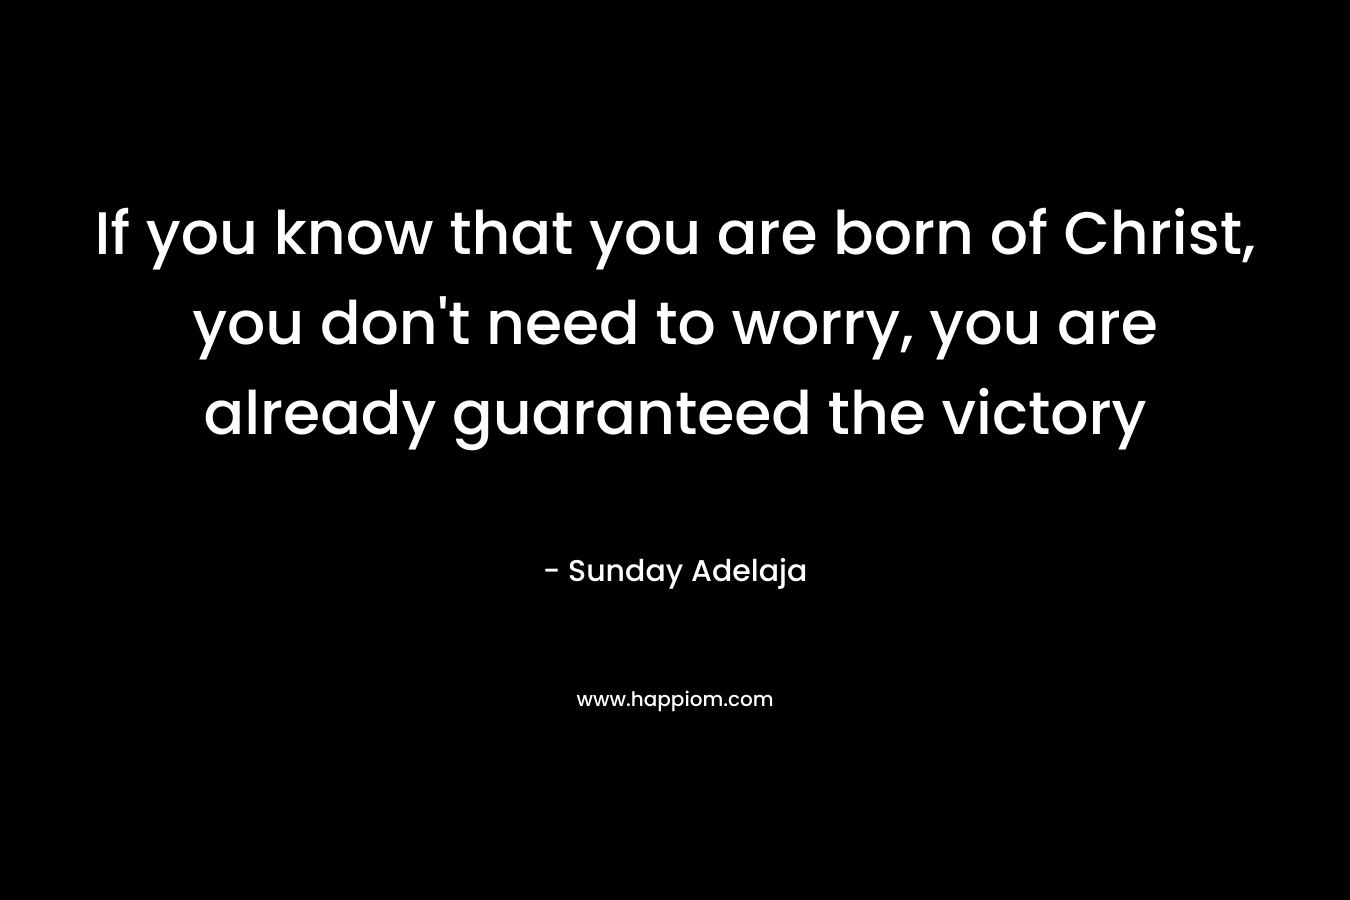 If you know that you are born of Christ, you don’t need to worry, you are already guaranteed the victory – Sunday Adelaja